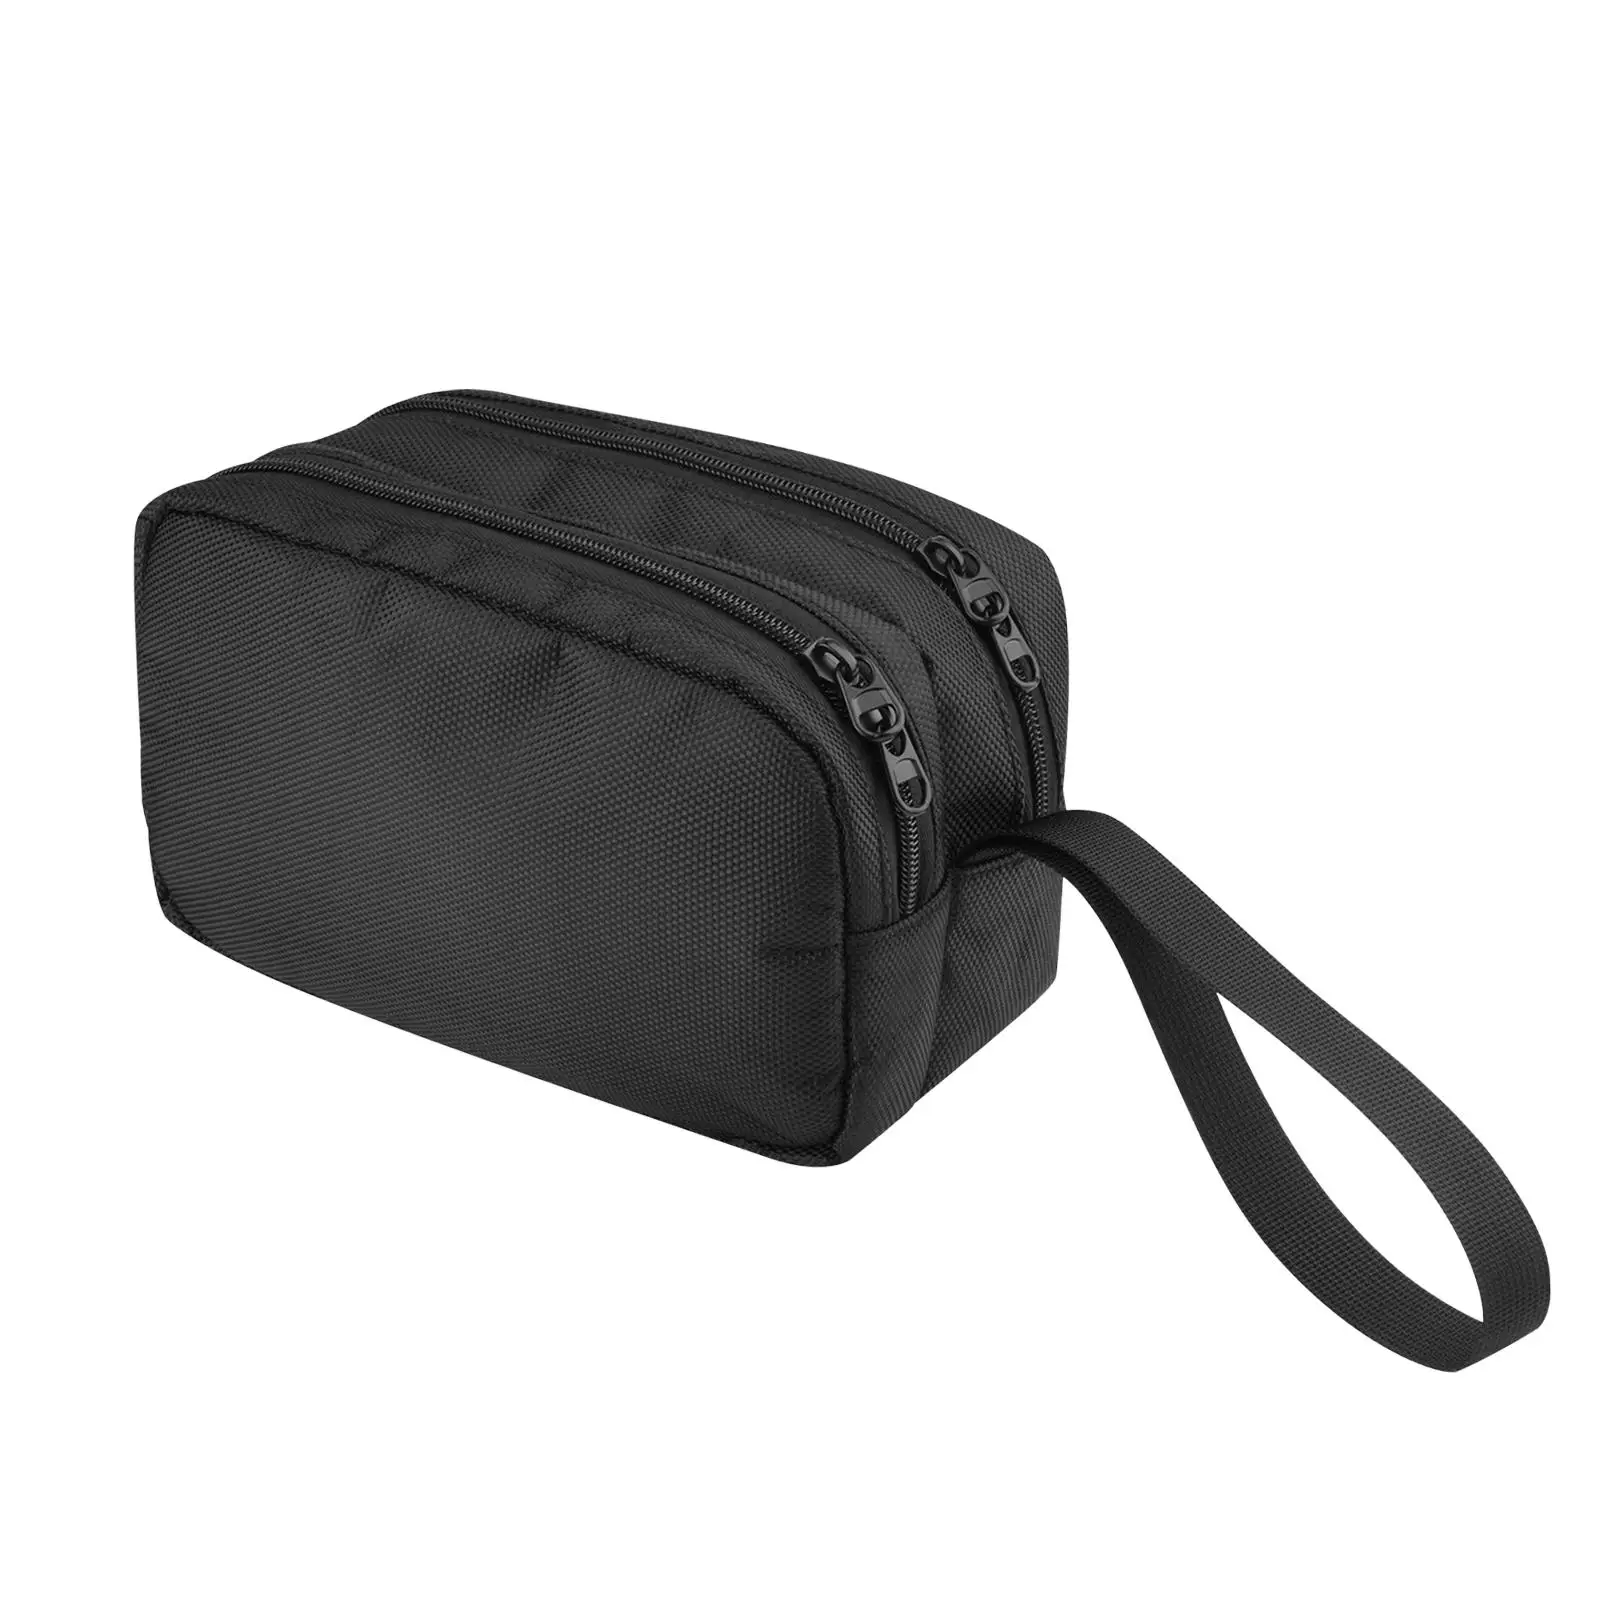 Black Carrying Case Multiple Pockets Design Waterproof Two Dual Zippers Design Multifunction Bag for Cords Electronic Product